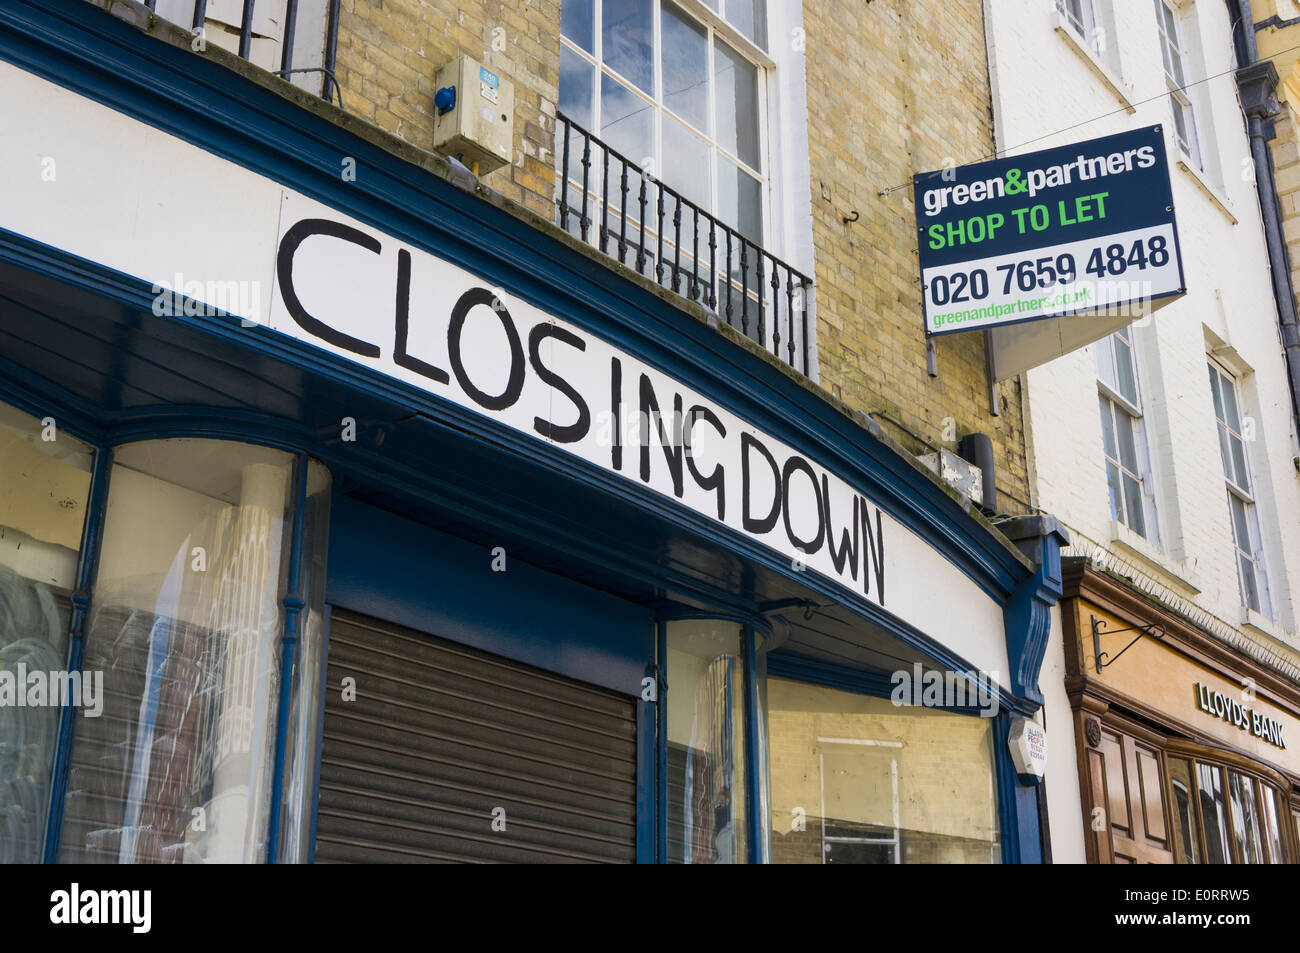 Closed shop to let, England, UK Stock Photo